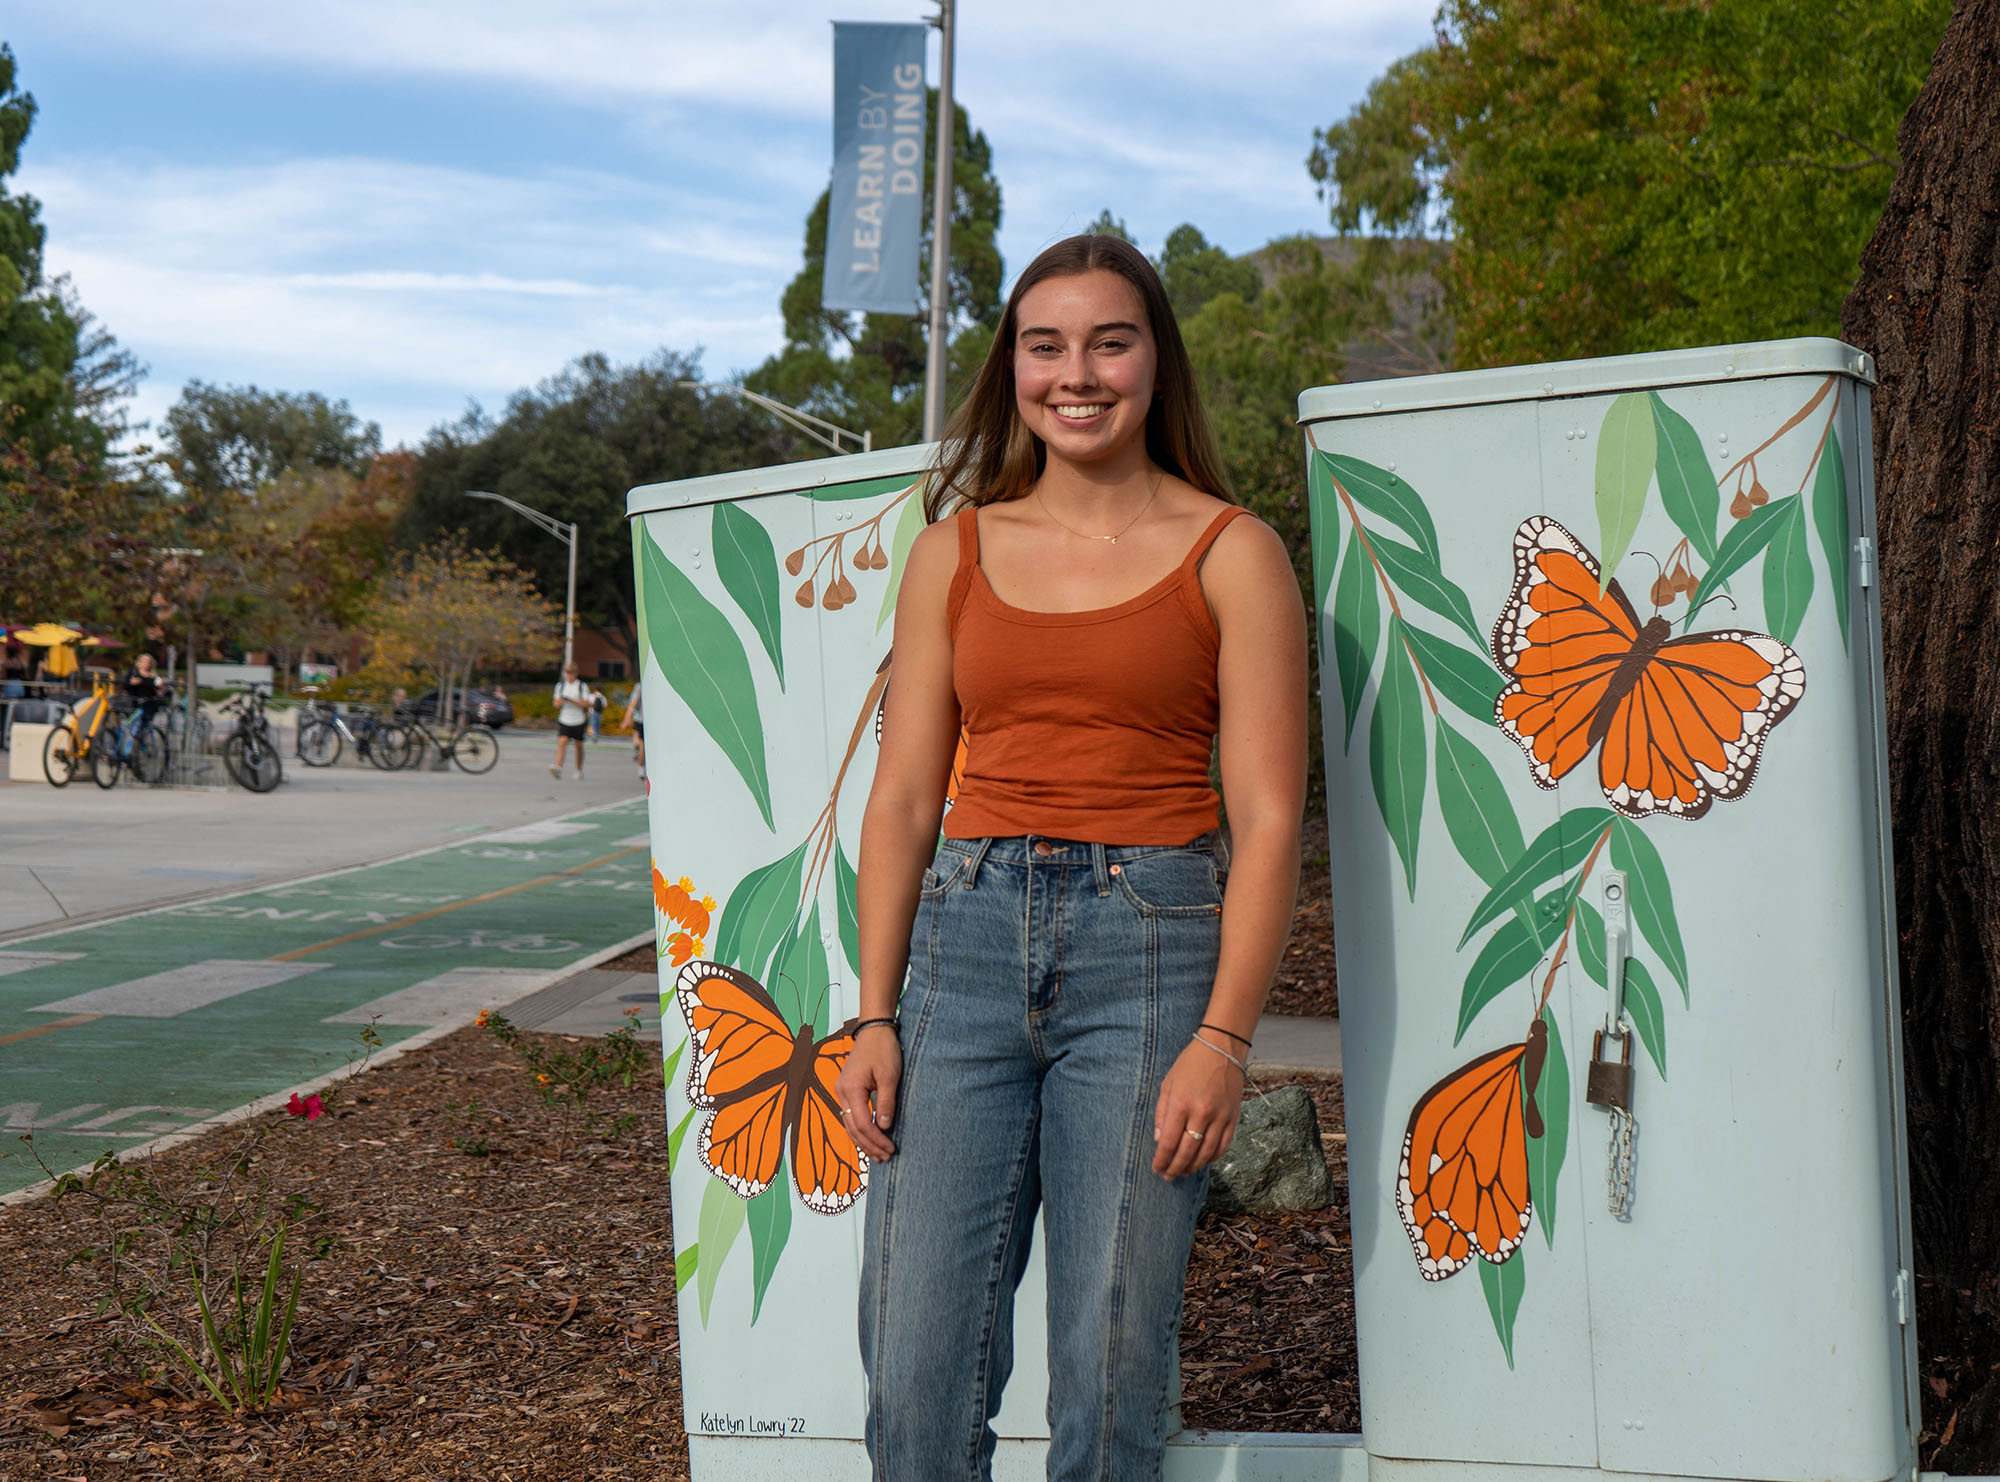 Girl standing next to the utility box